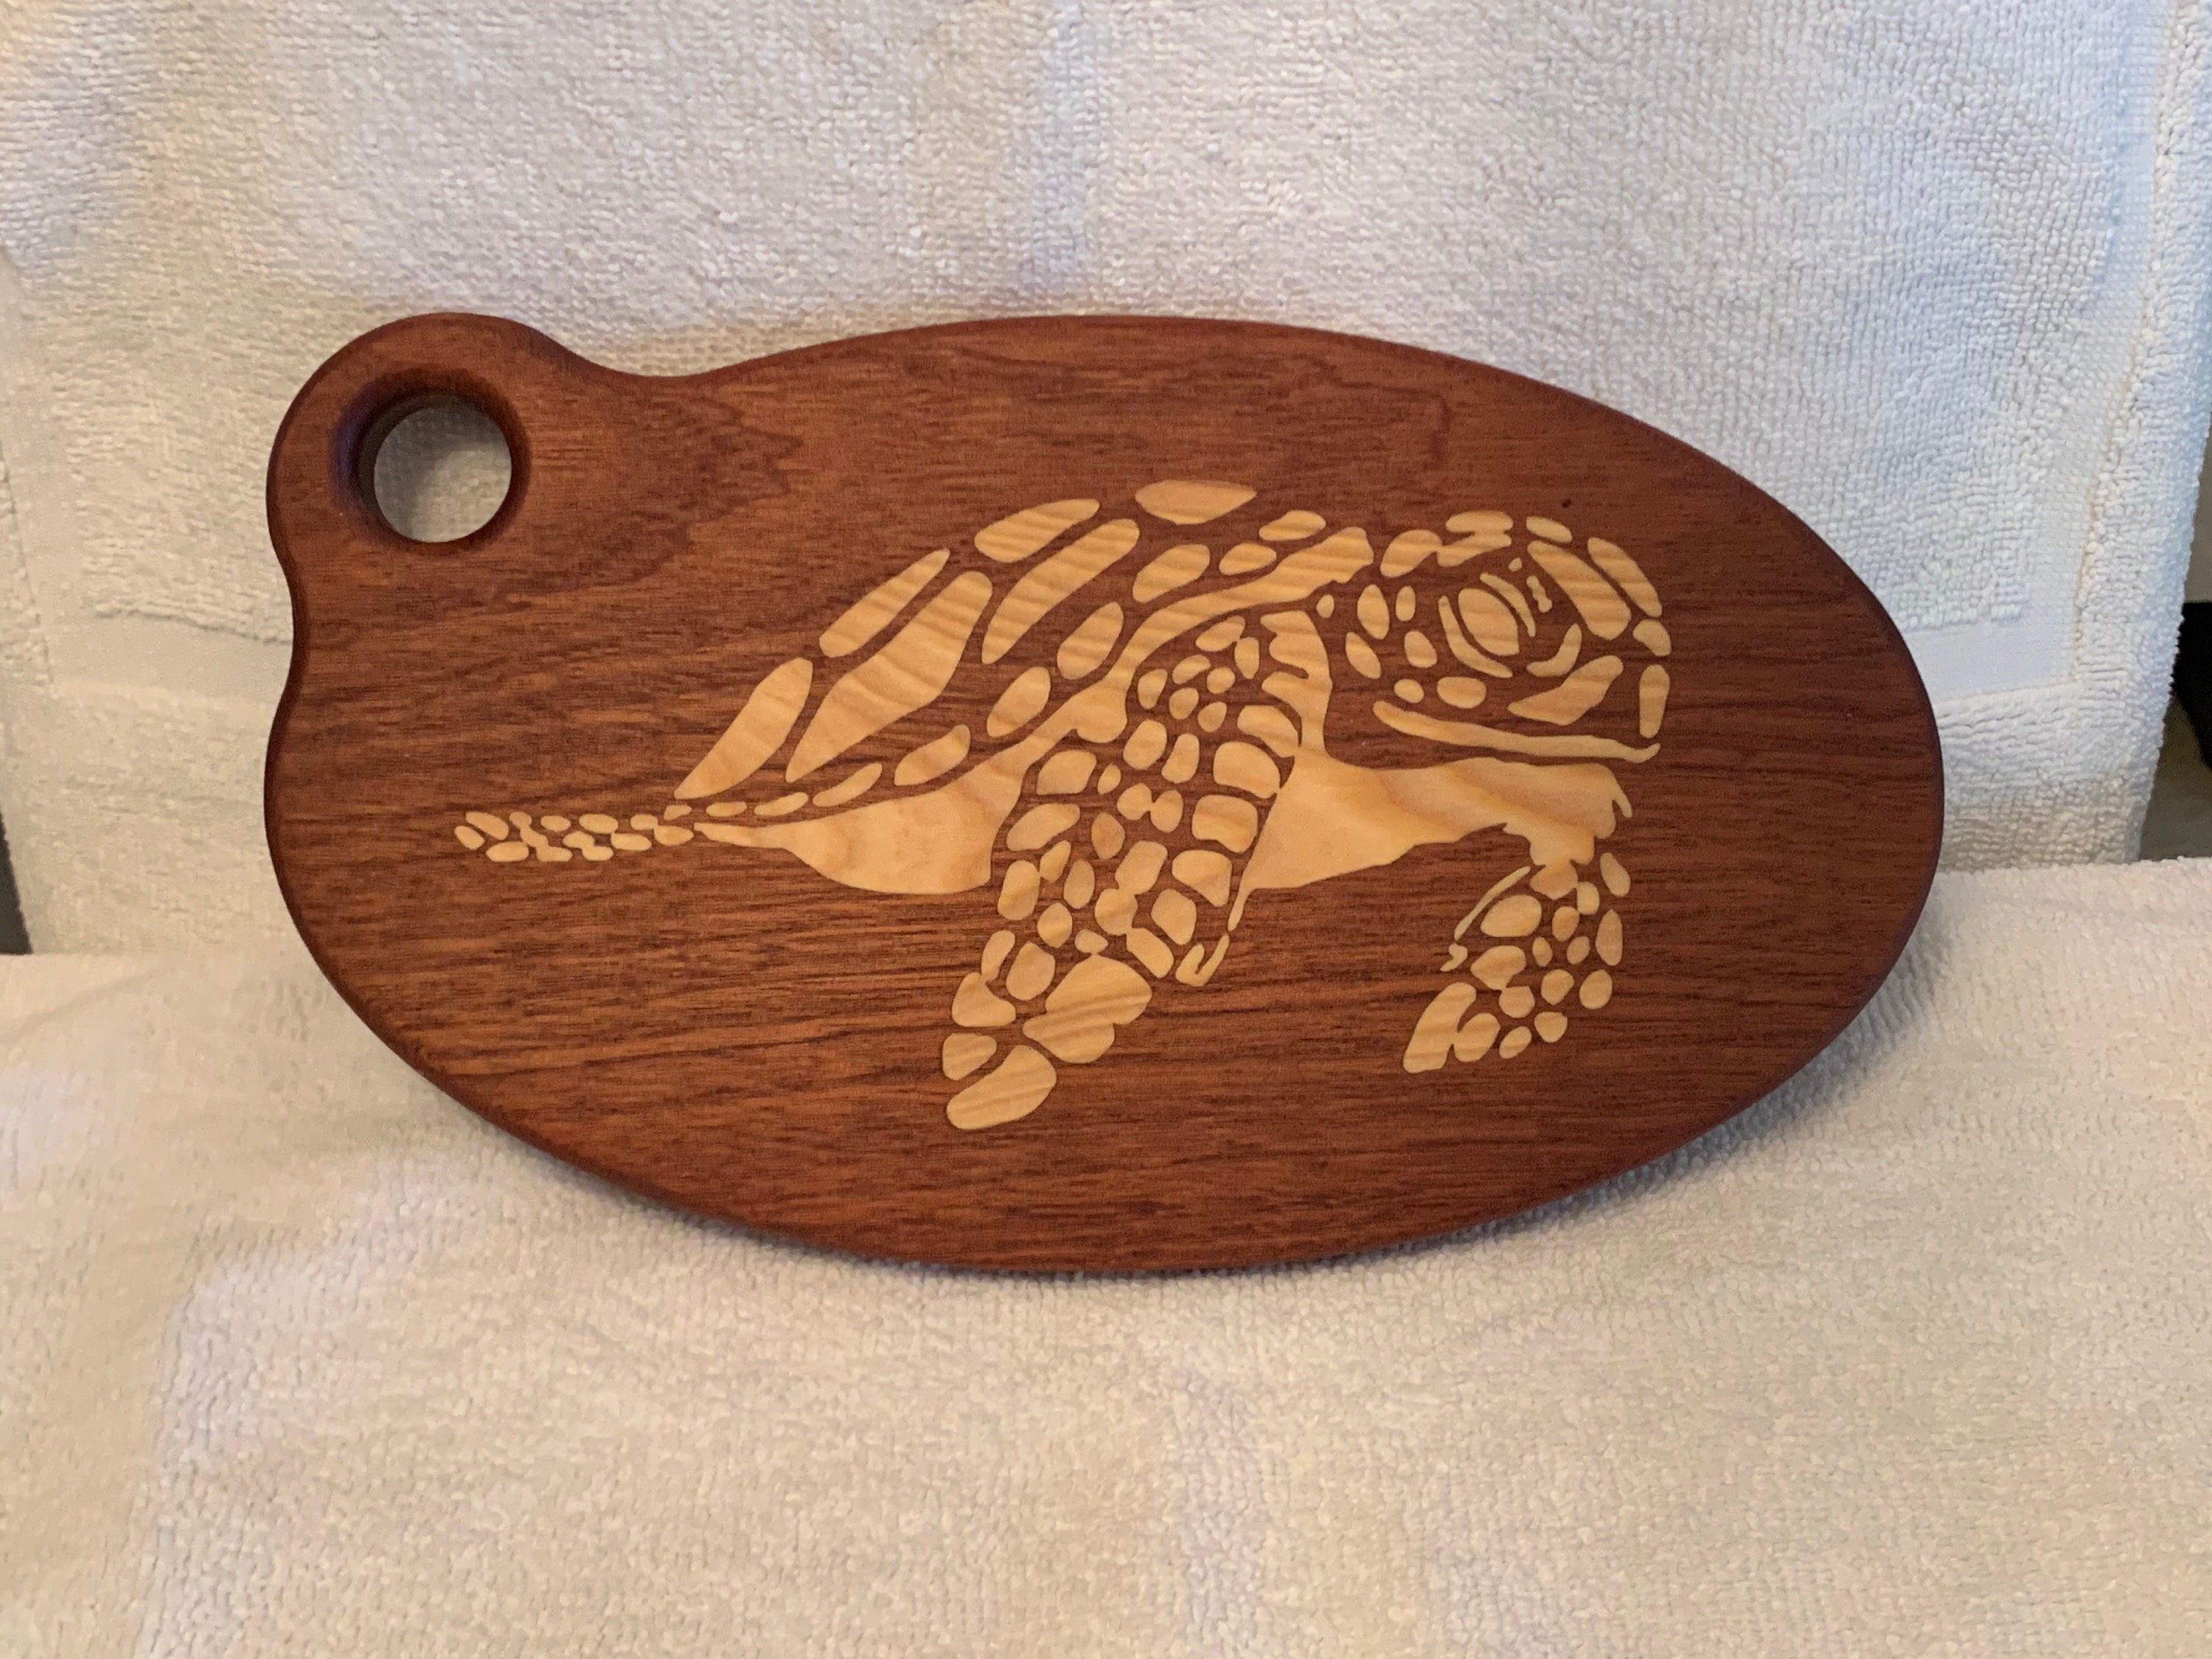 Turtle inlay Mahogany Cutting/Charcuterie Board Oval | Etsy